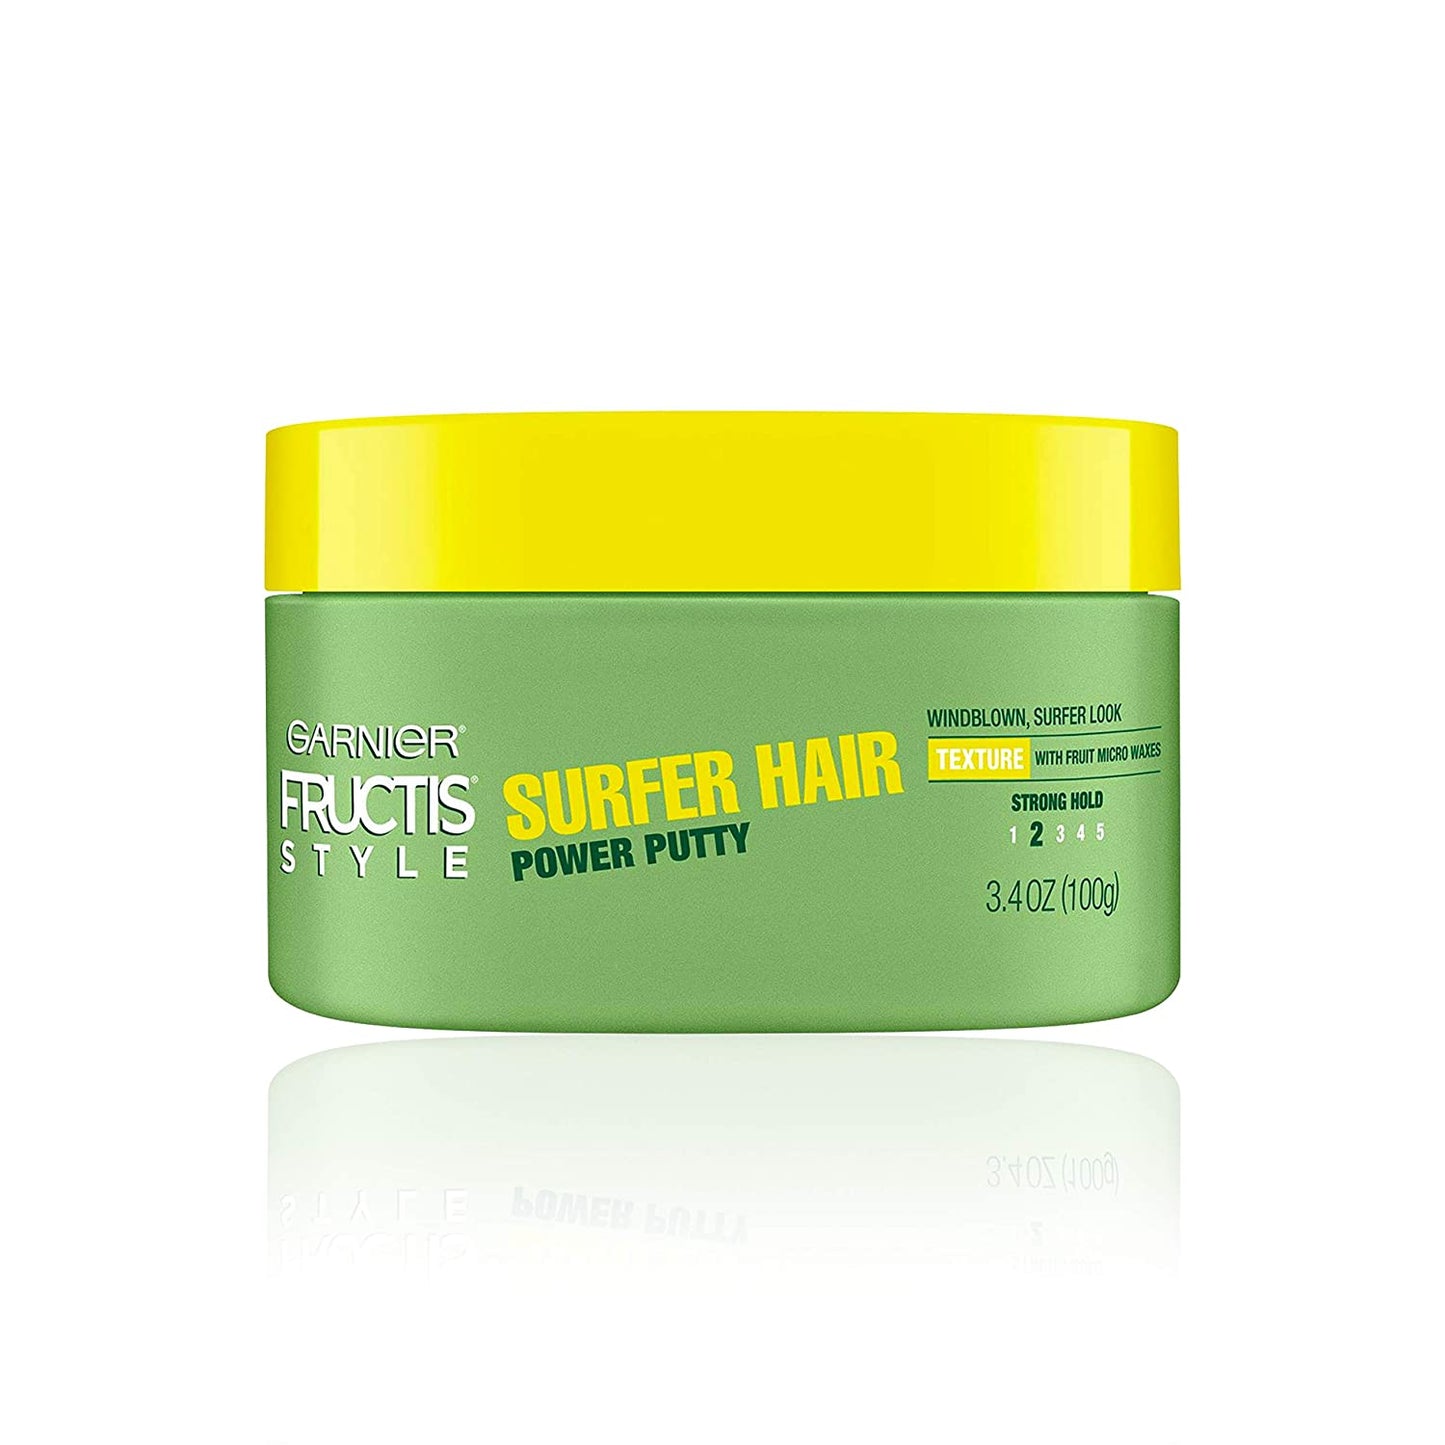 Garnier Fructis Style Surfer Hair Power Putty with Fruit Micro Waxes, 3.4 oz. / 100g